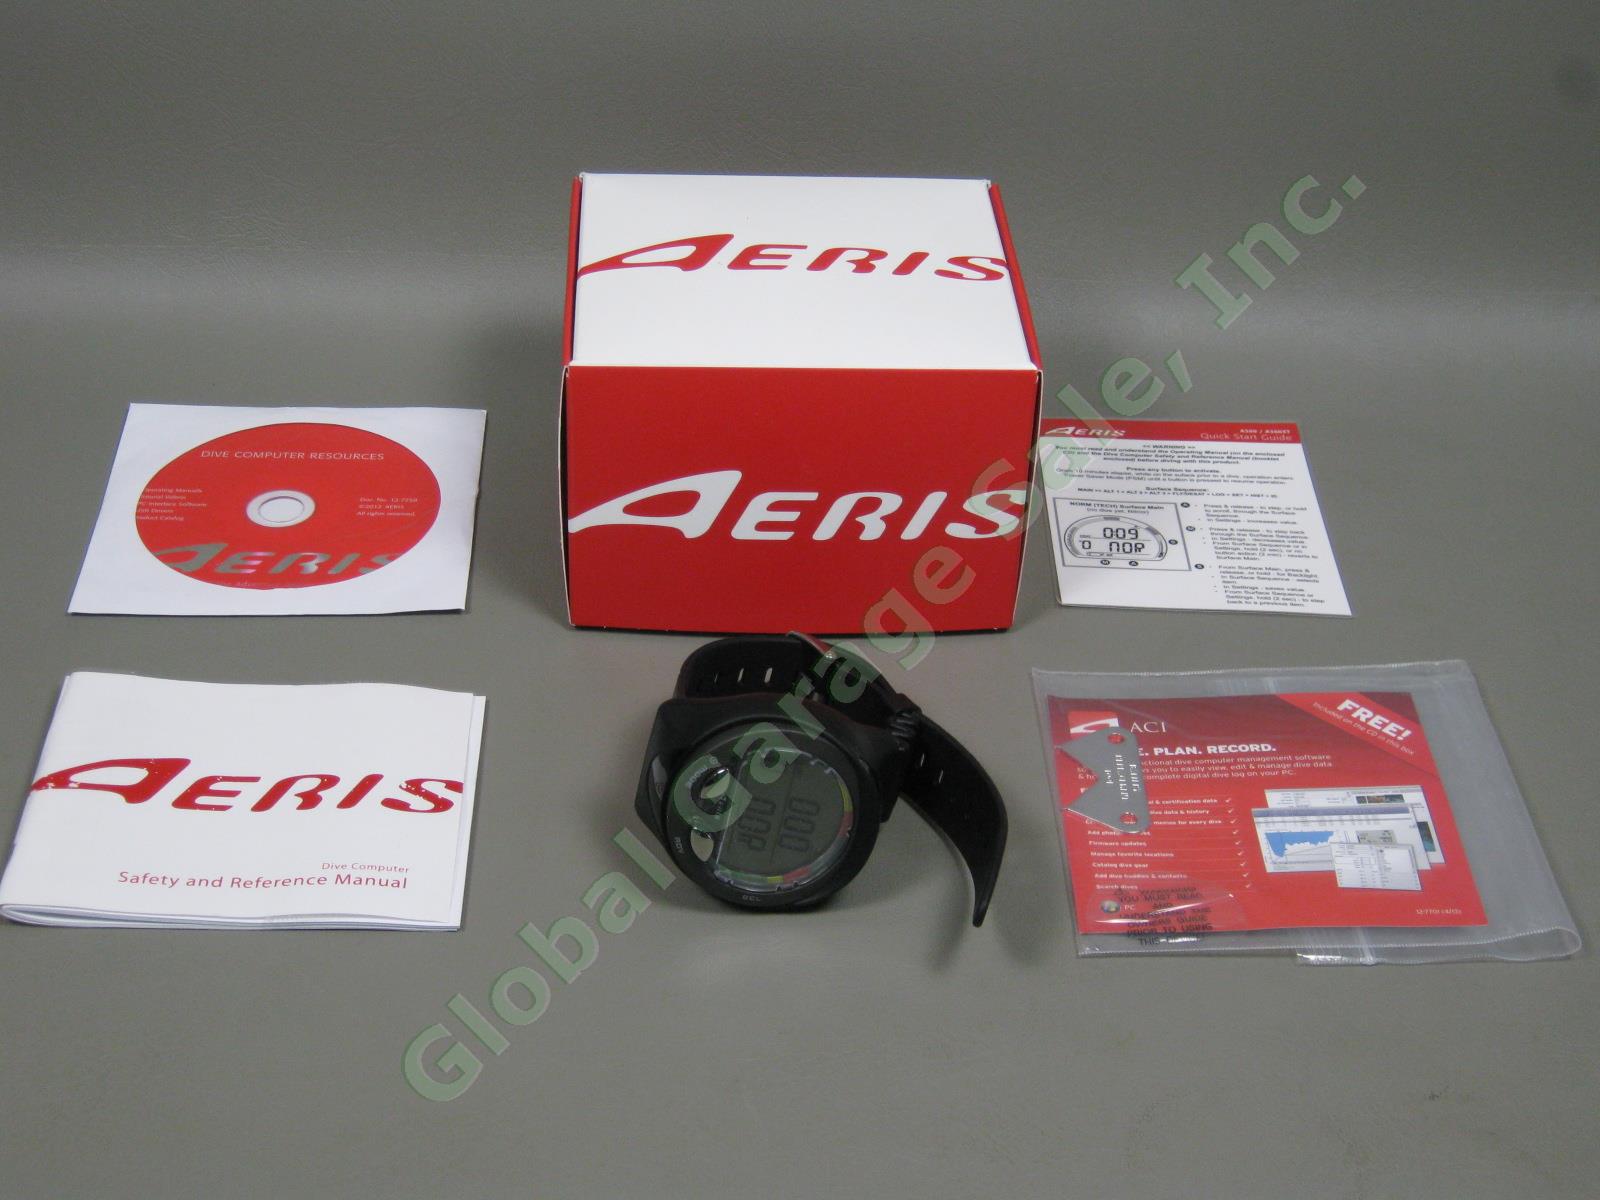 Aeris A300 Wrist Computer 10.6262 Dive Scuba One Owner Hardly Used Mint Cond! NR